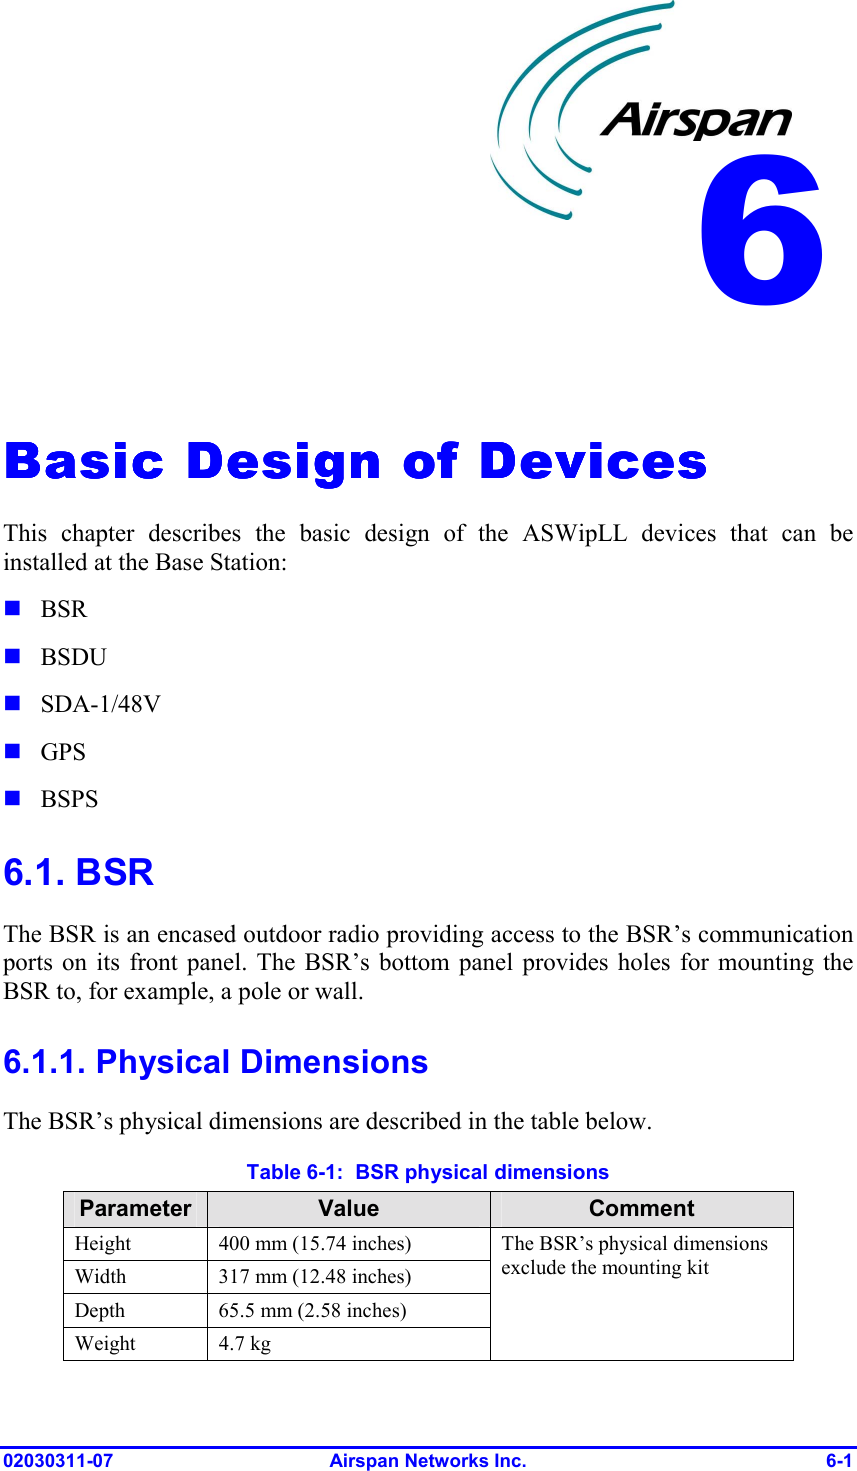  02030311-07 Airspan Networks Inc.  6-1   Basic Design of DevicesBasic Design of DevicesBasic Design of DevicesBasic Design of Devices    This chapter describes the basic design of the ASWipLL devices that can be installed at the Base Station: ! BSR ! BSDU ! SDA-1/48V ! GPS ! BSPS 6.1. BSR The BSR is an encased outdoor radio providing access to the BSR’s communication ports on its front panel. The BSR’s bottom panel provides holes for mounting the BSR to, for example, a pole or wall. 6.1.1. Physical Dimensions The BSR’s physical dimensions are described in the table below.  Table  6-1:  BSR physical dimensions Parameter  Value  Comment Height  400 mm (15.74 inches) Width  317 mm (12.48 inches) Depth  65.5 mm (2.58 inches) Weight 4.7 kg The BSR’s physical dimensions exclude the mounting kit 6 